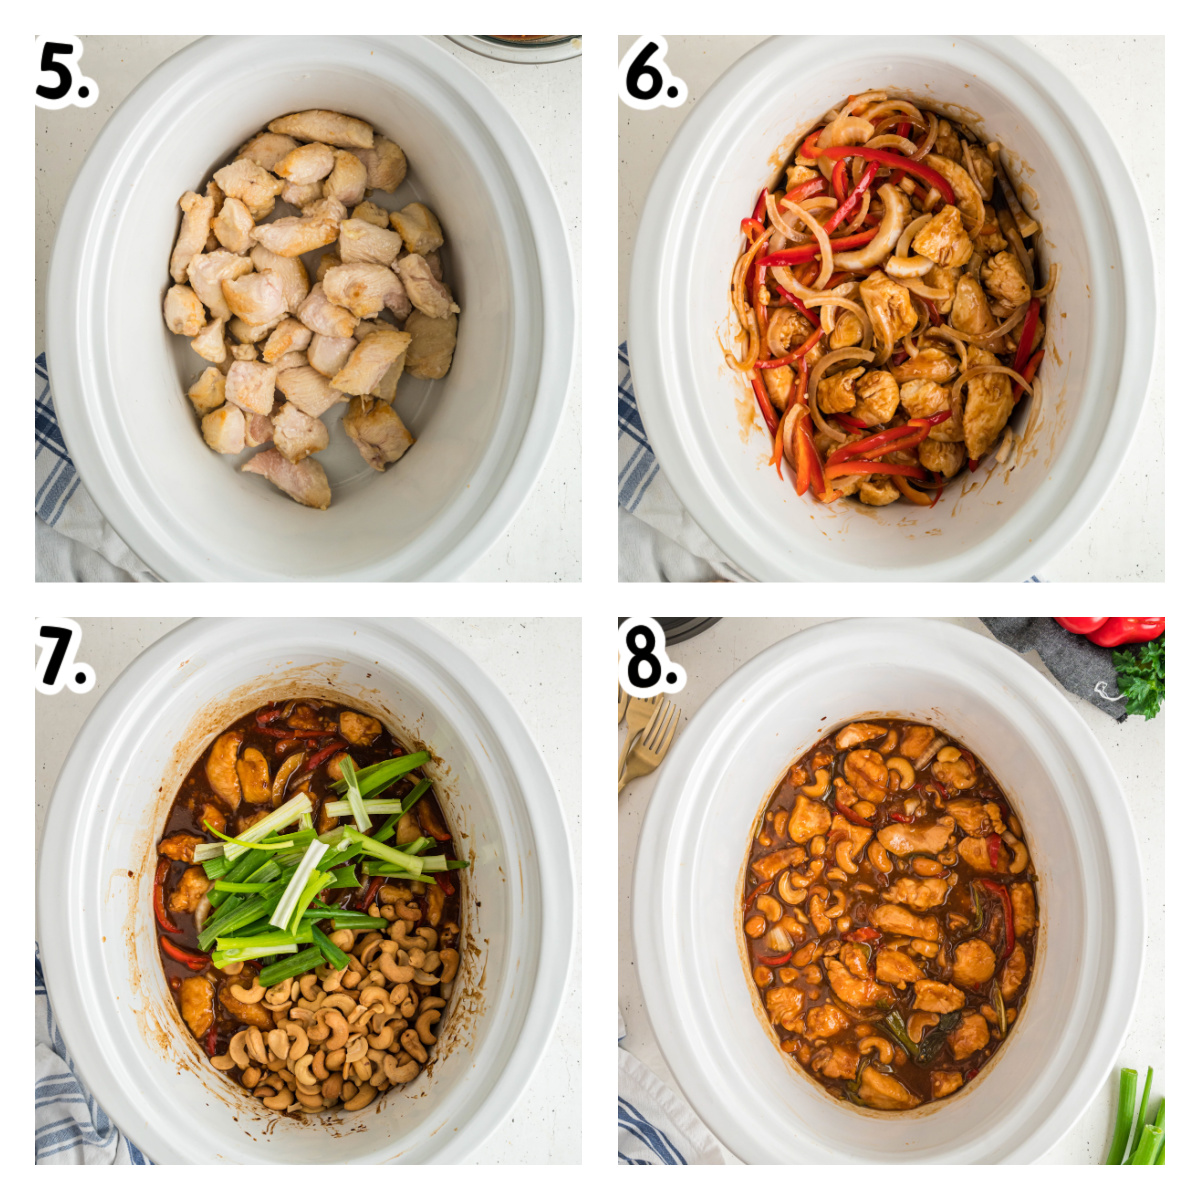 Four images showing how to finish making cashew chicken in a slow cooker.